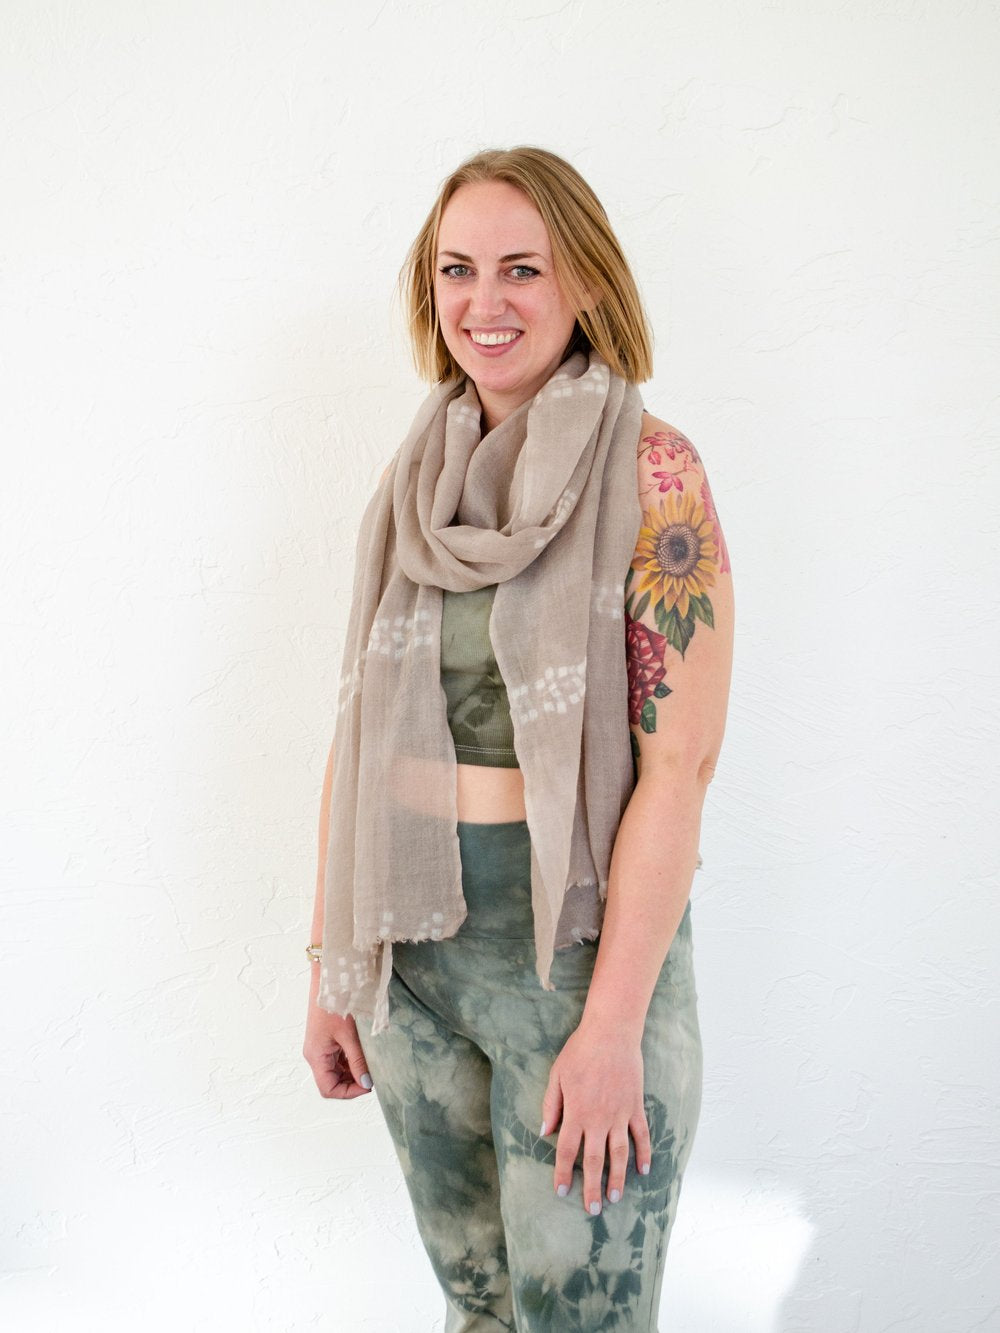 Patterned One-of-a-Kind Hand-Dyed Wool Gauze Scarf in Sand Color by 1 Life - Hand-Dyed Wool Scarf for Warm or Cold Weather